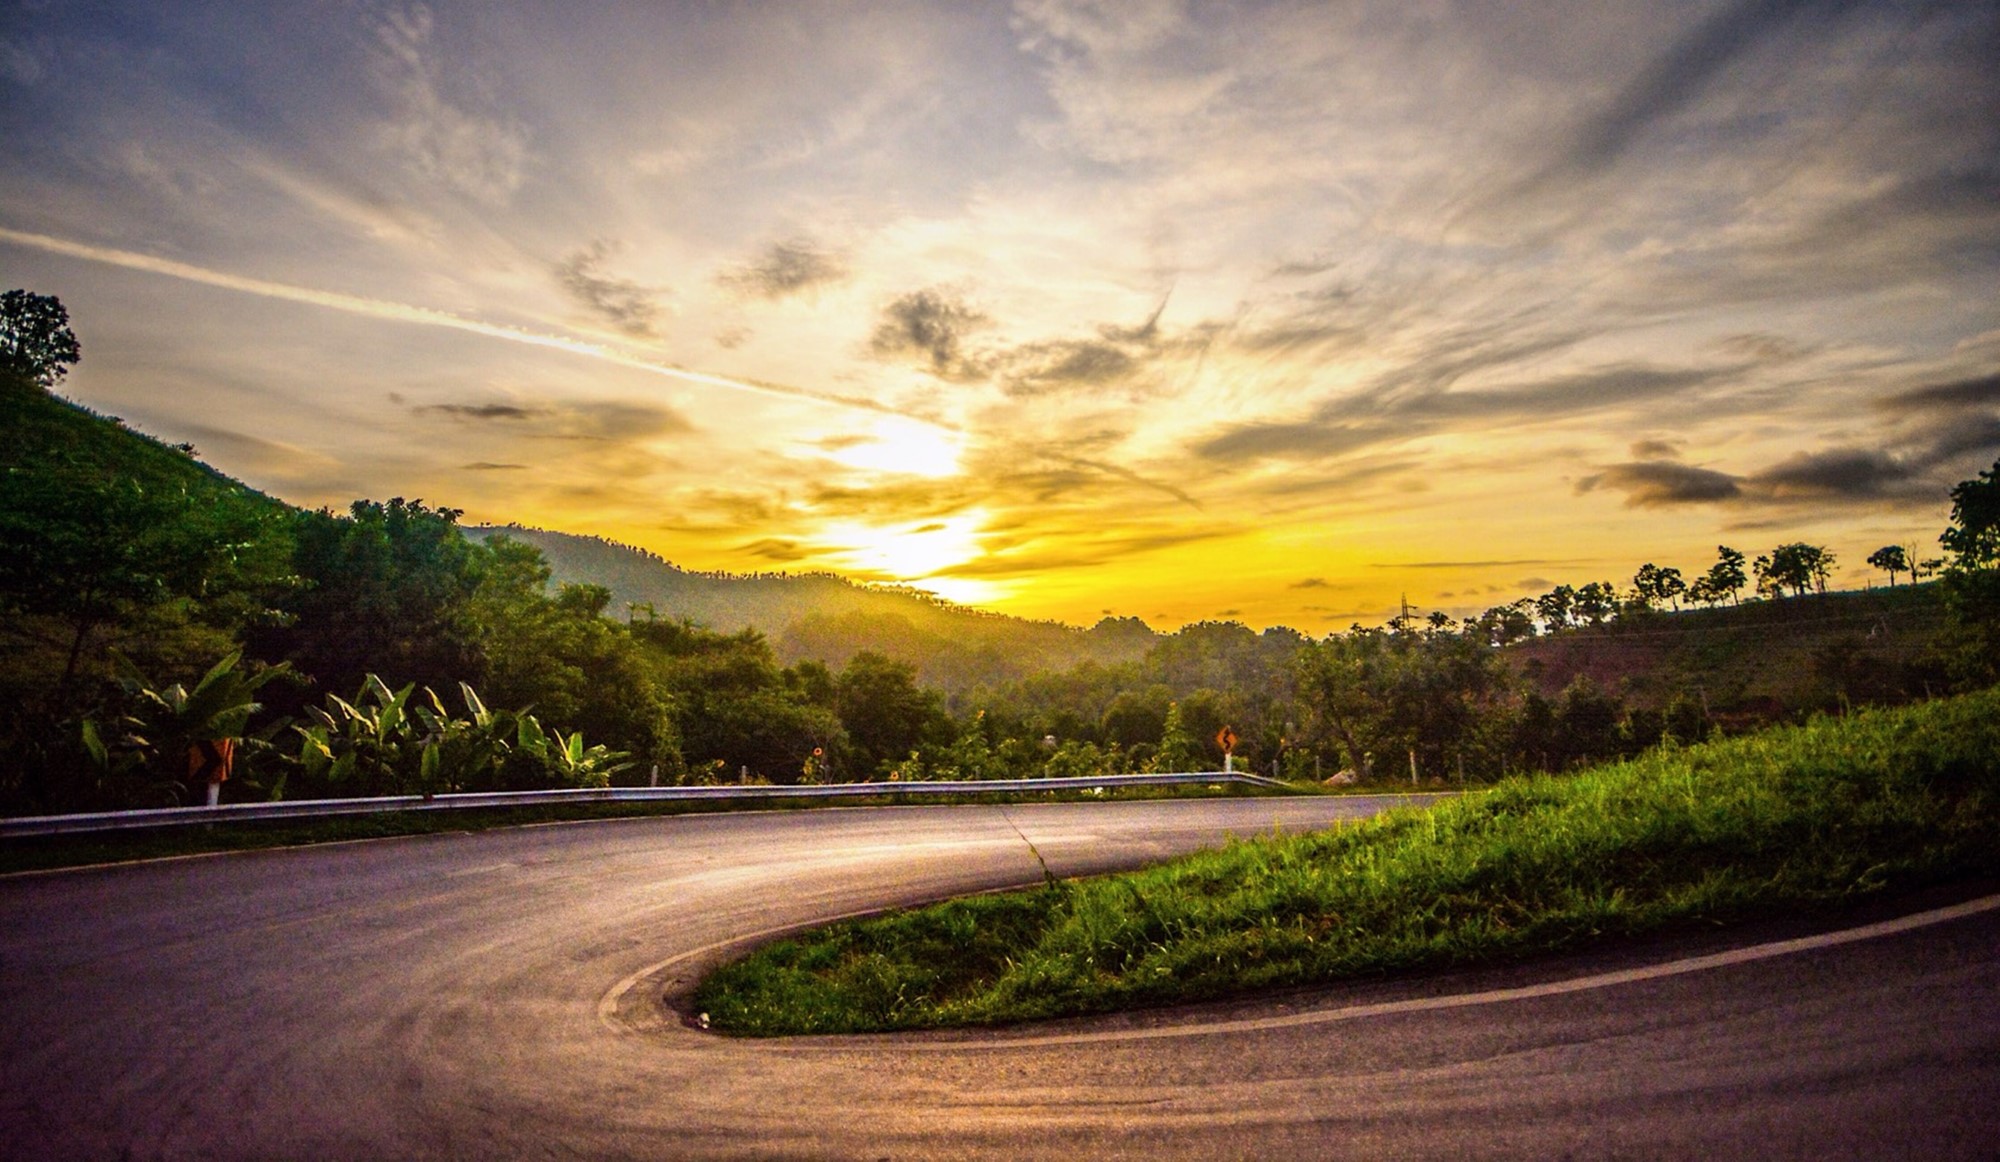 Curving road to Pai